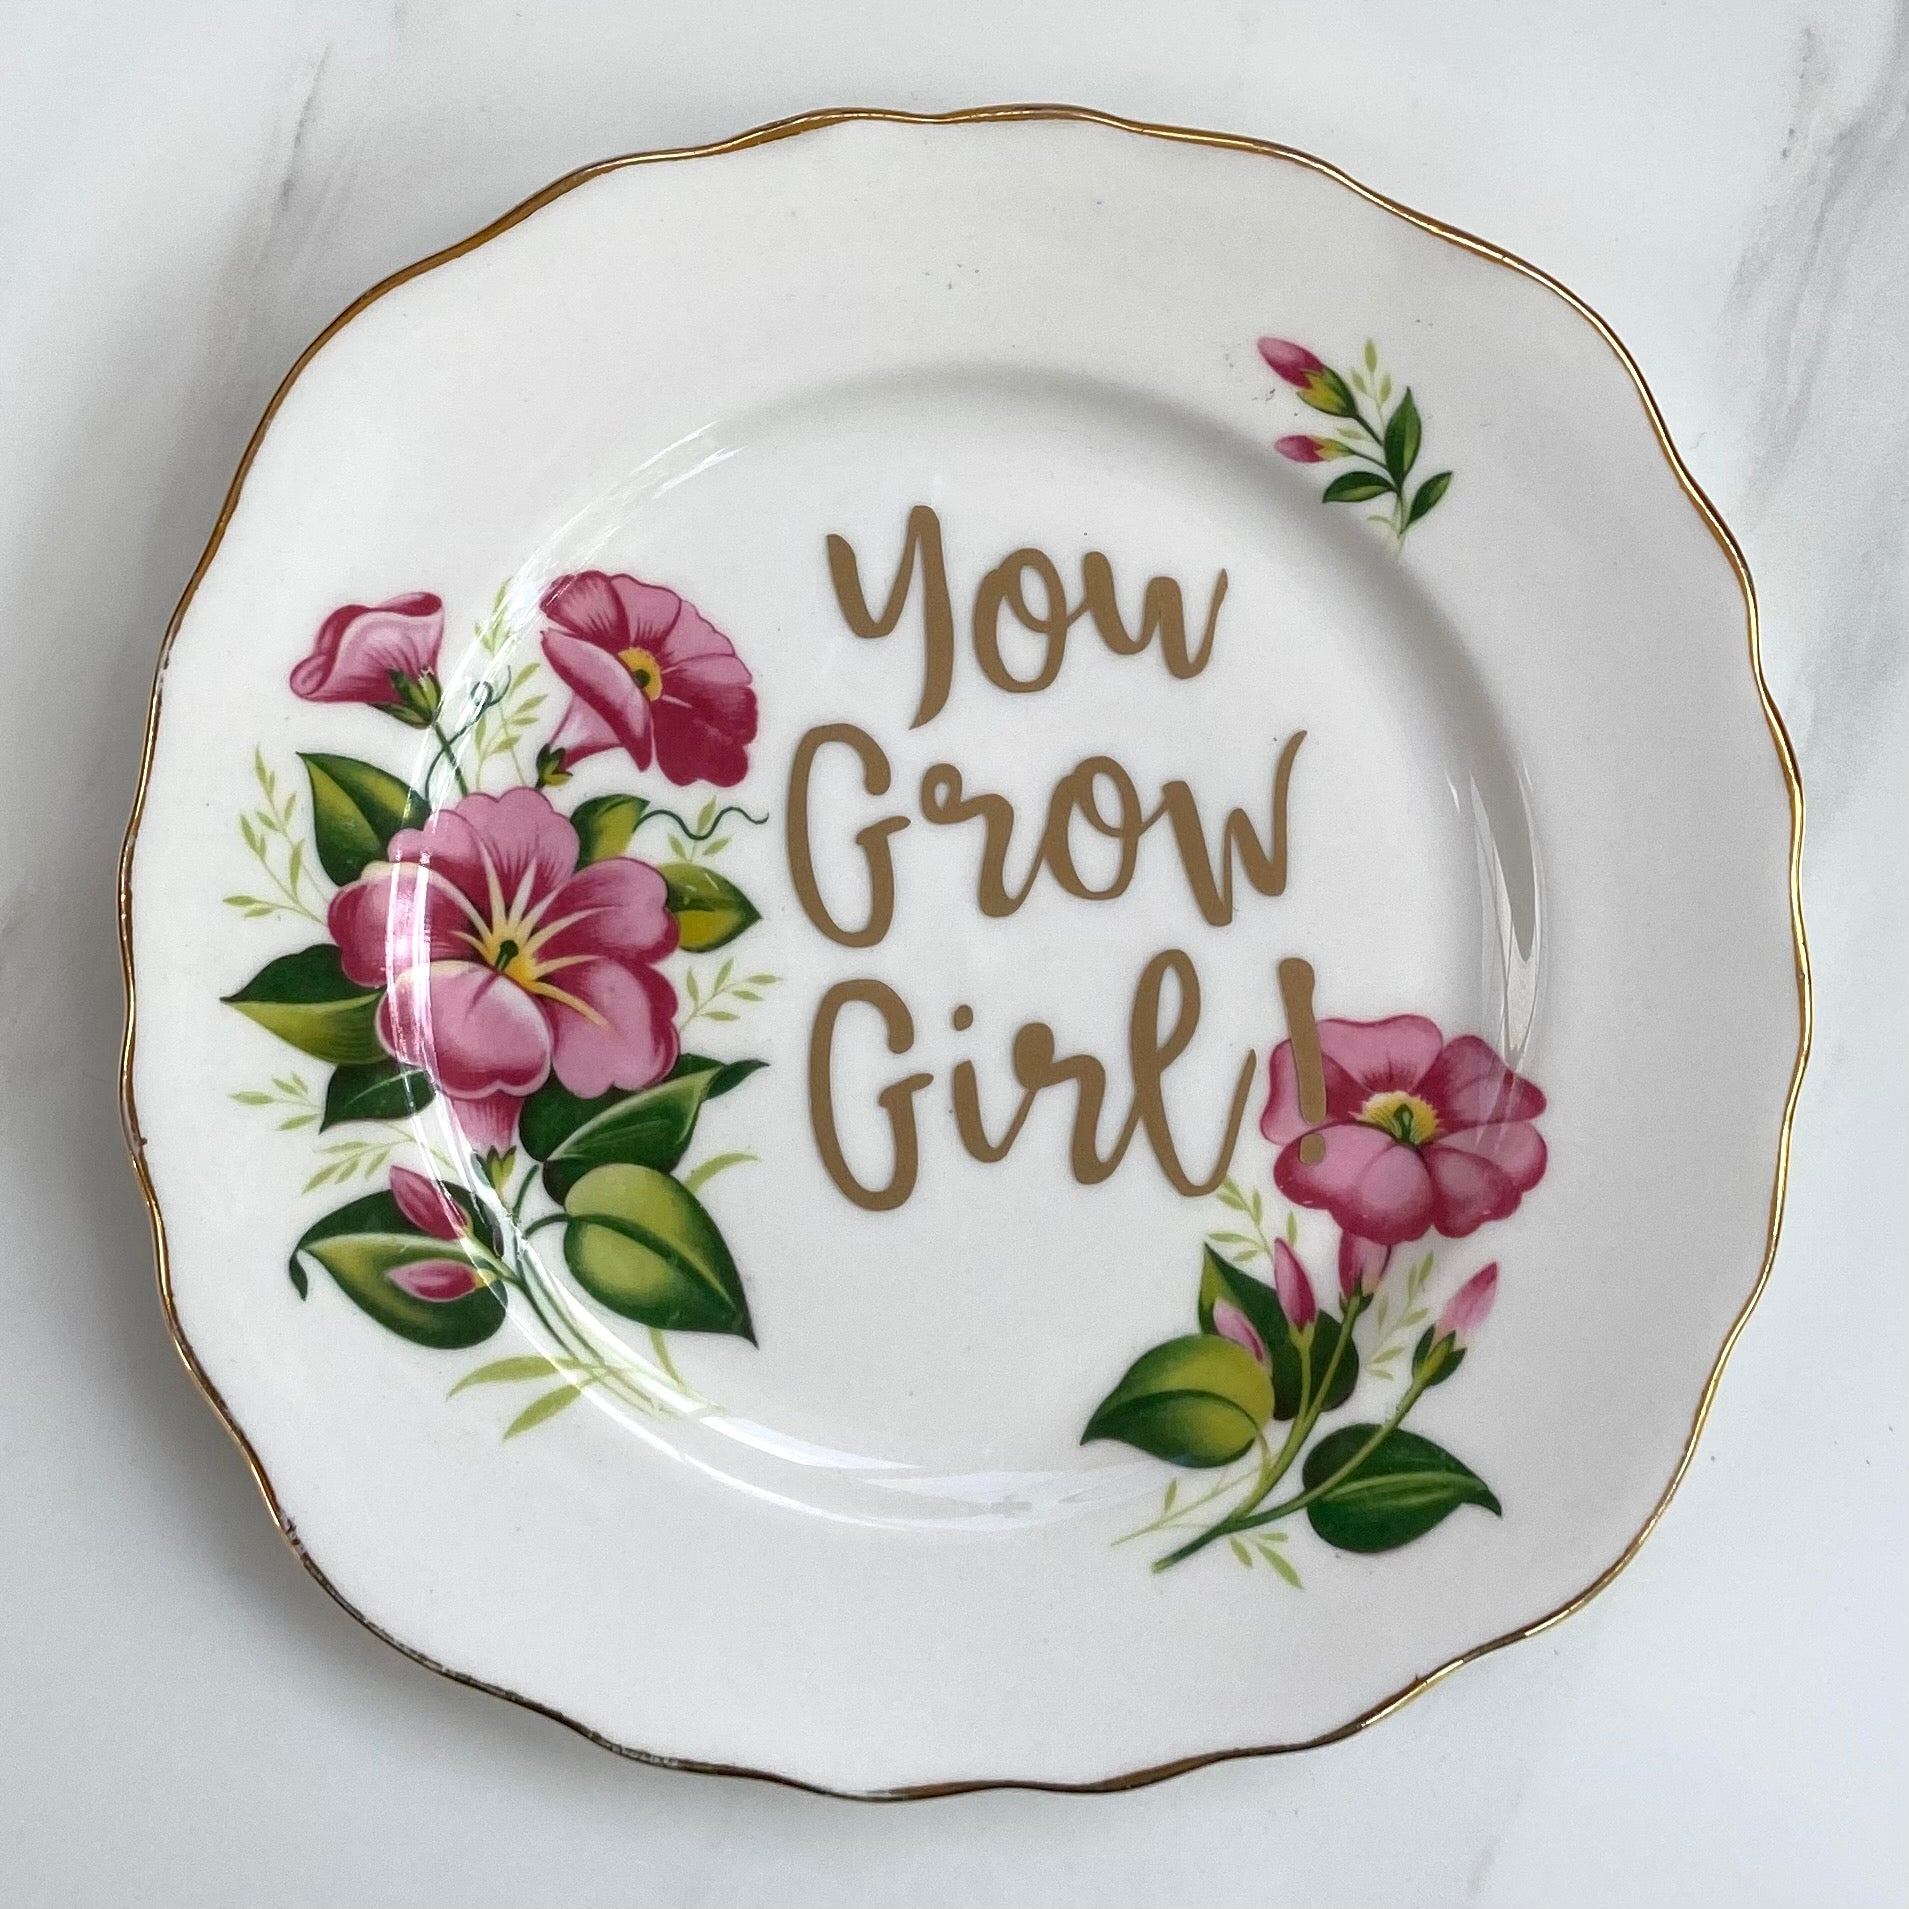 ‘You grow girl!’ quote on plate